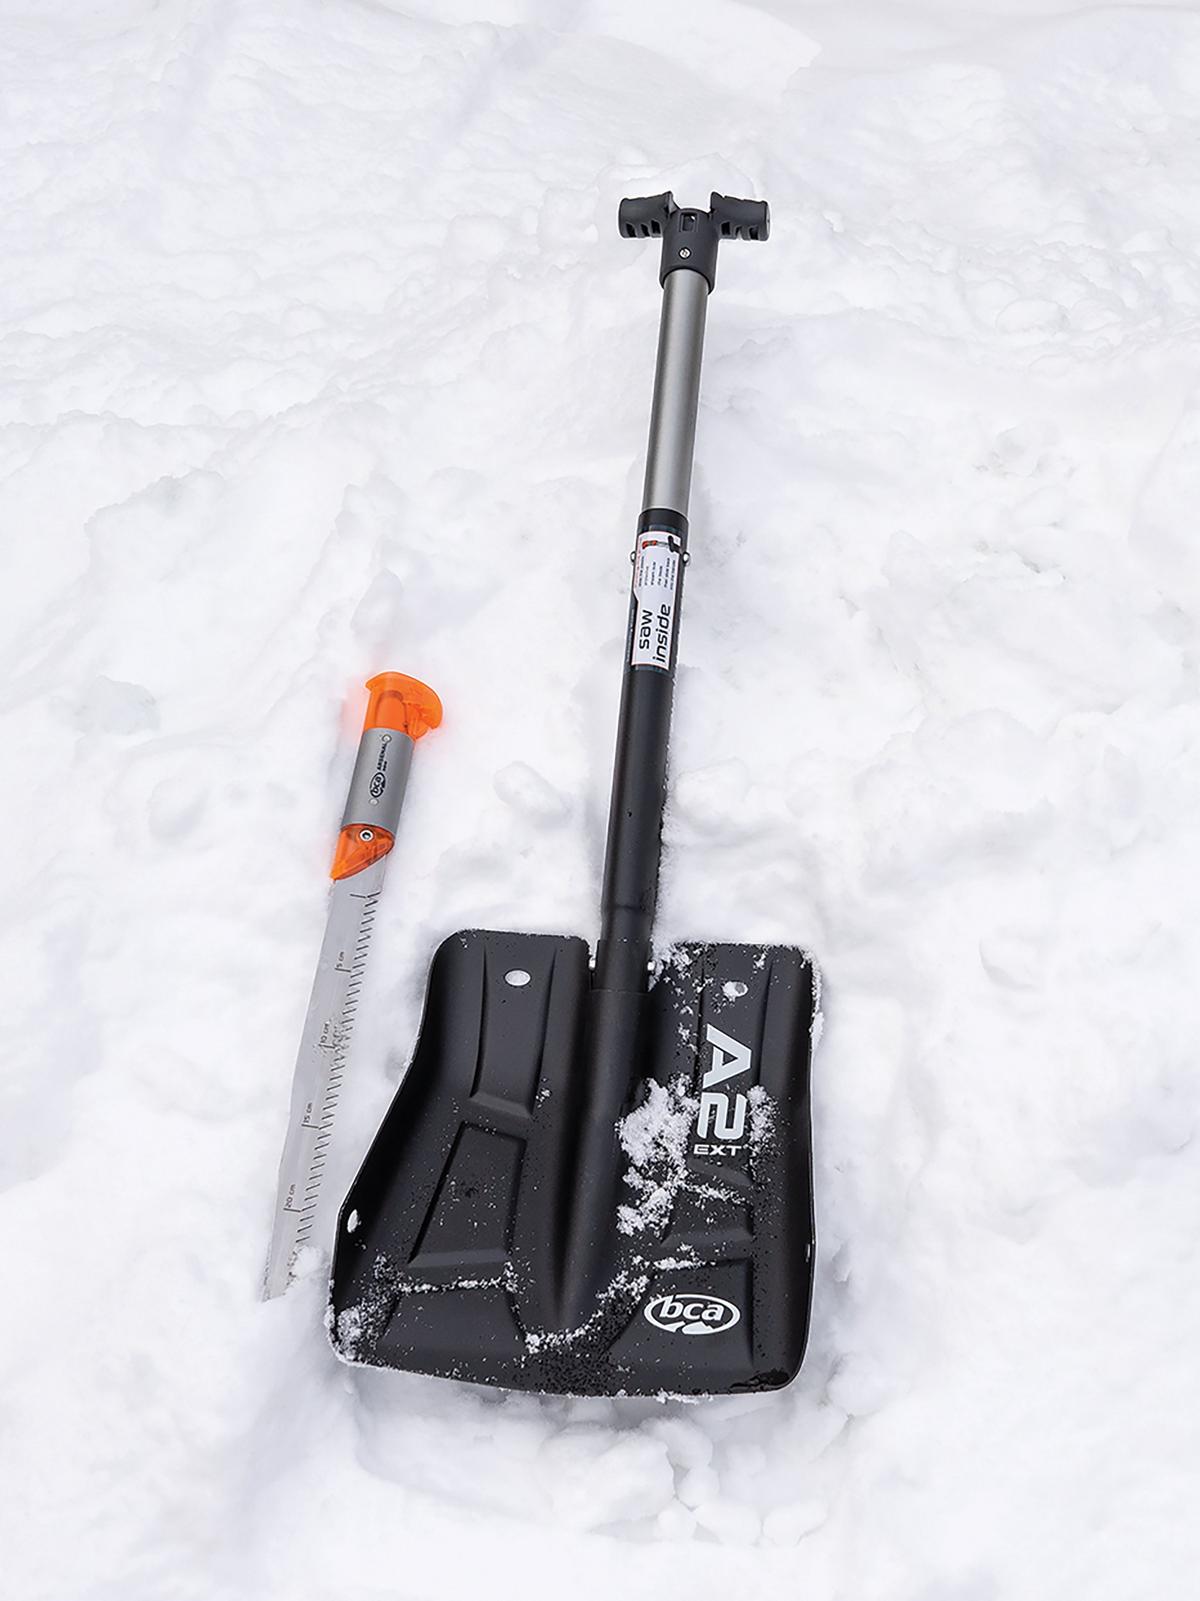 Backcountry Snow Shovel Flexible and Lightweight Shovel and Multi-Use Snow Tool Yellow SnowClaw 